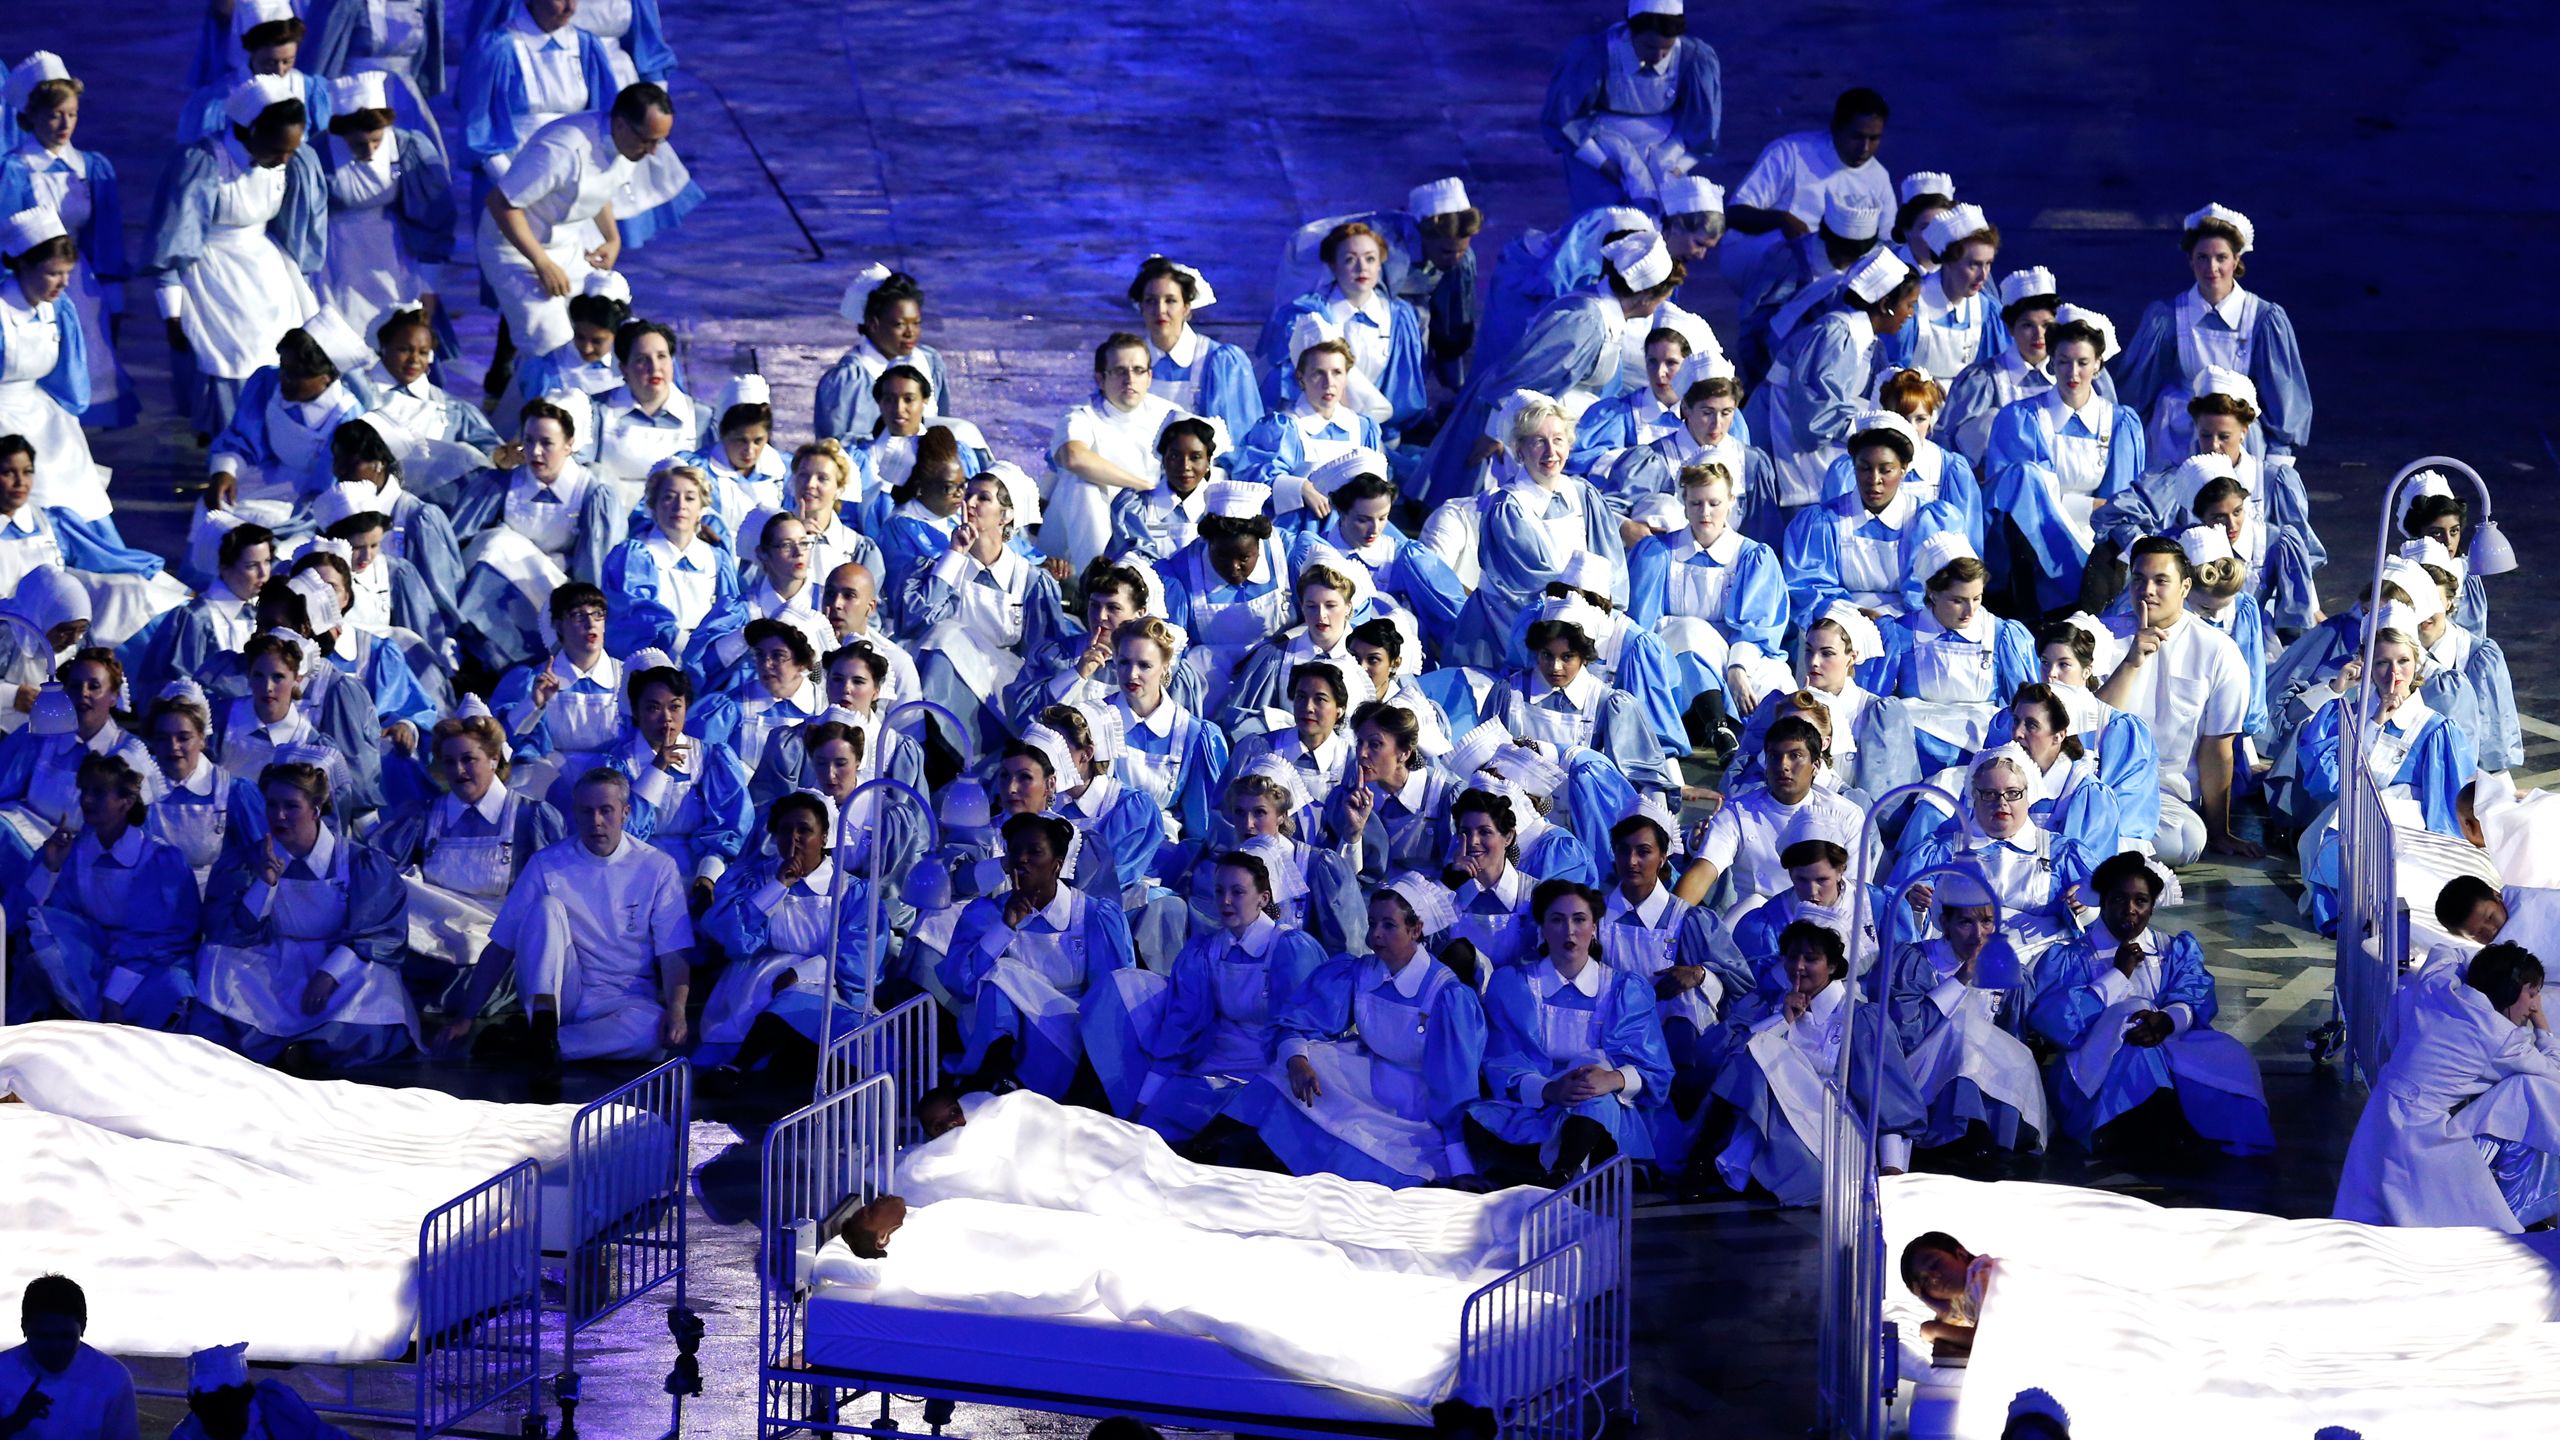 The 2012 Olympic Ceremony